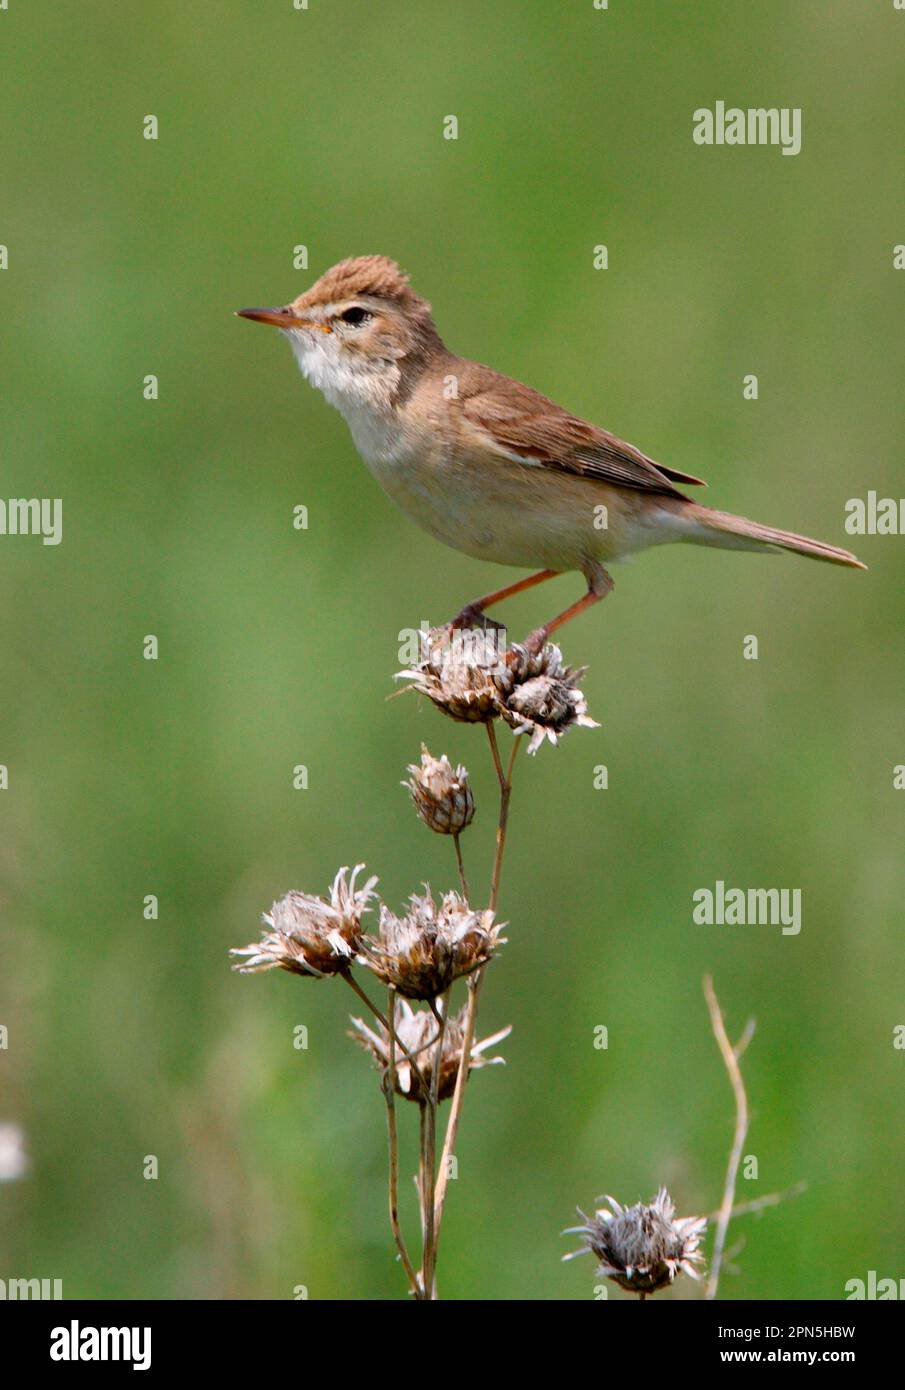 Booted Warbler (Hippolais caligata) adult, crown feathers raised, perched on seedhead, Aqmola Province, Kazakhstan Stock Photo